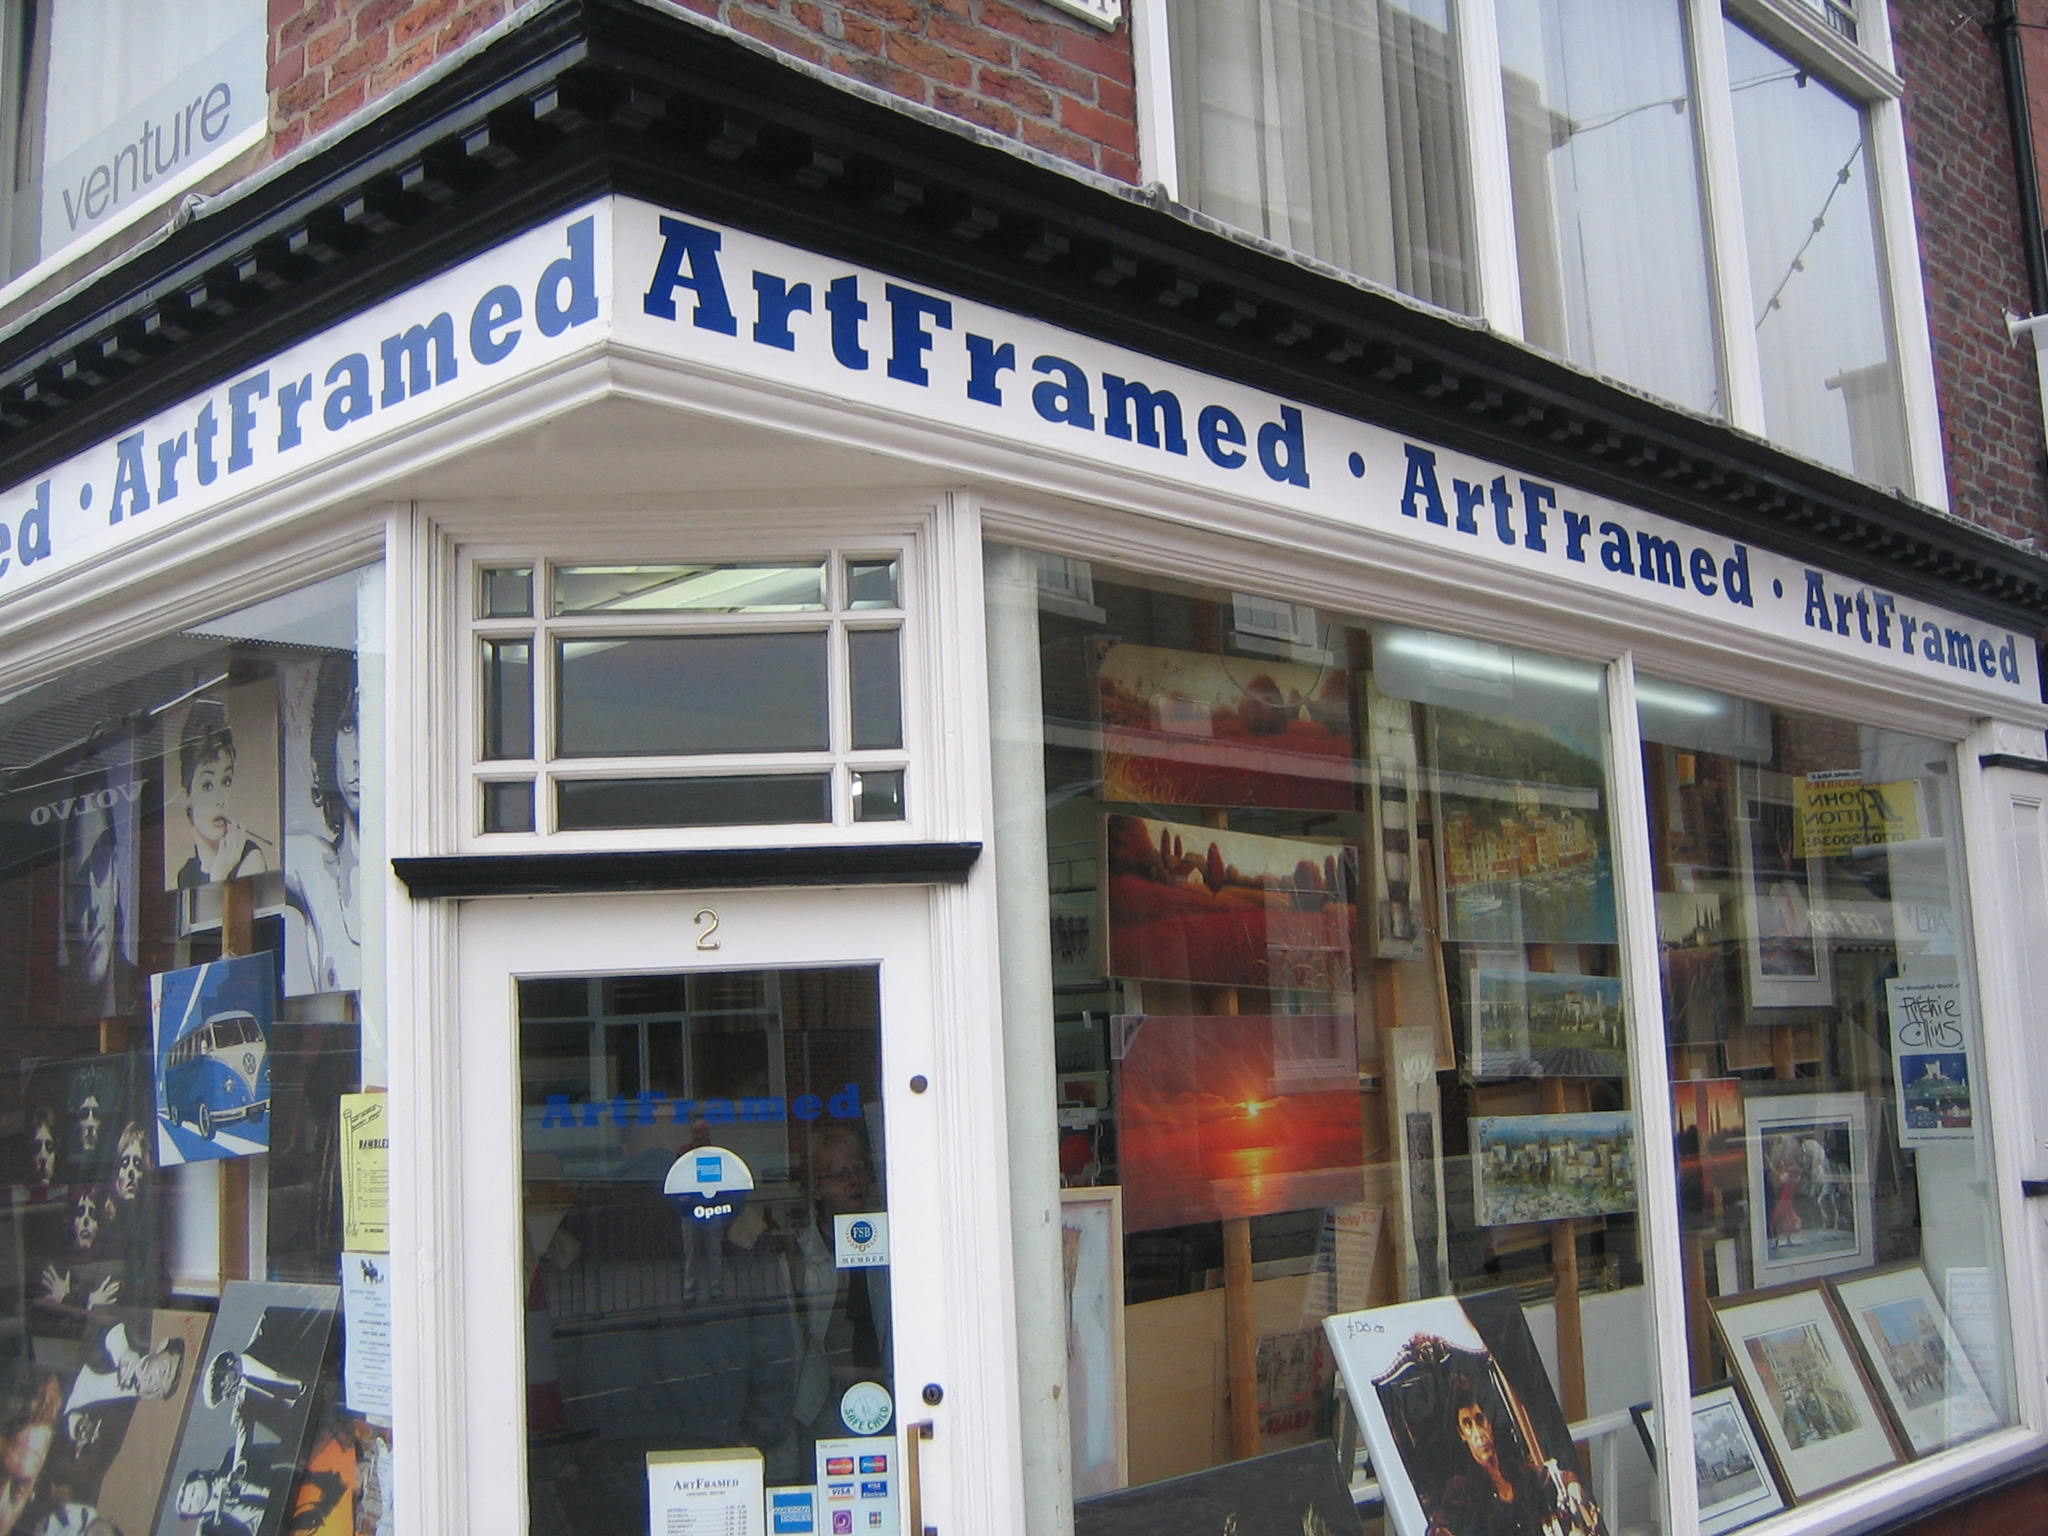 The ArtFramed shop in the centre of Ormskirk